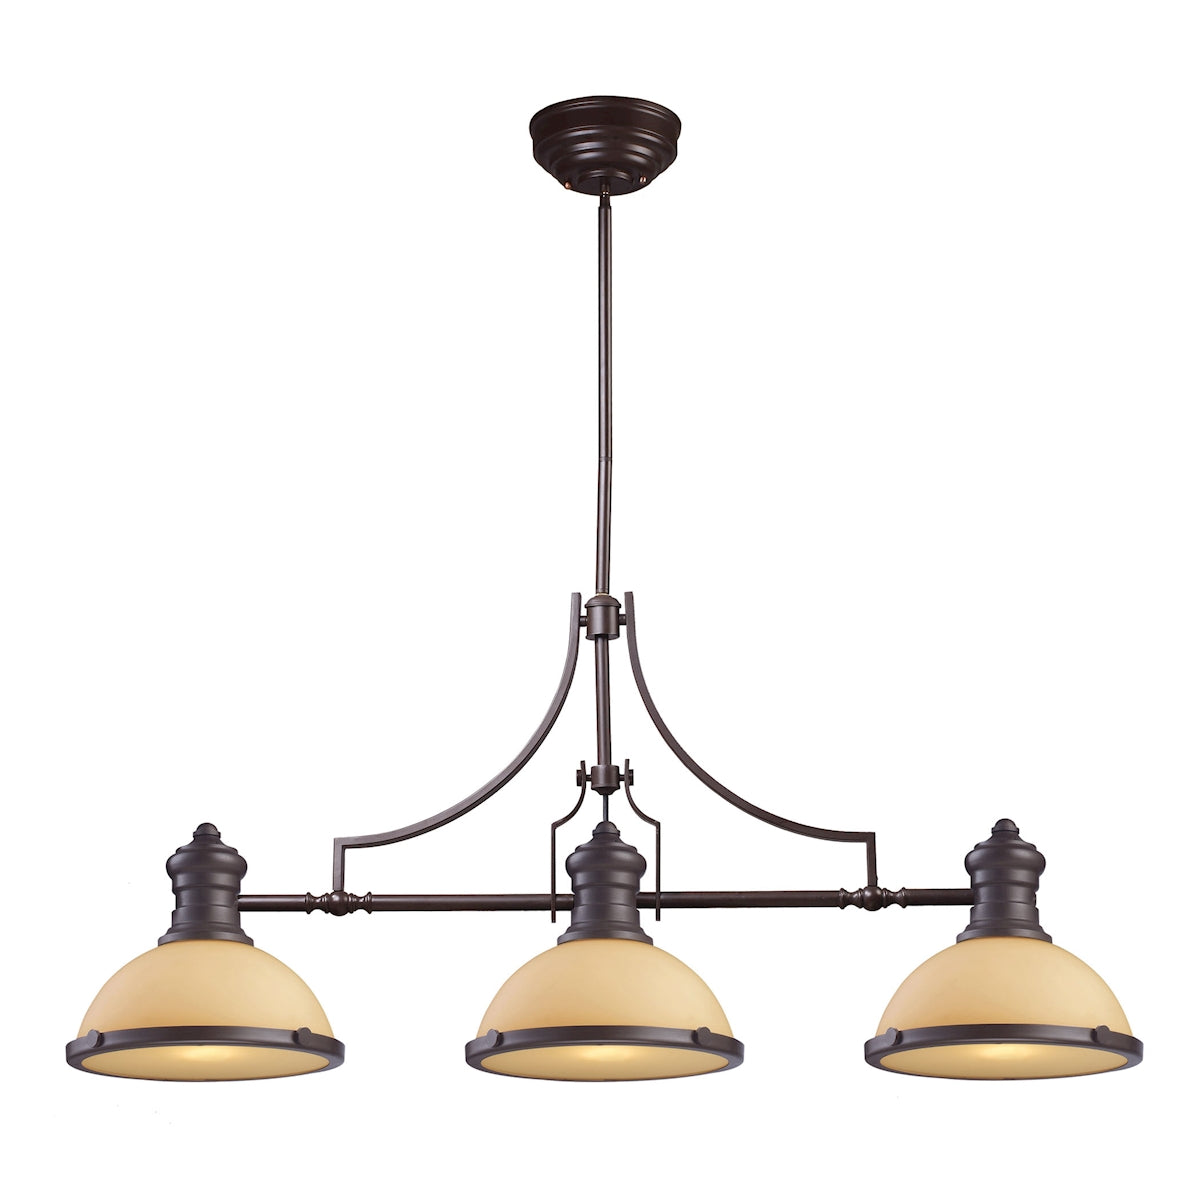 ELK Lighting 66235-3 Chadwick 3-Light Island Light in Oiled Bronze with Off-white Glass